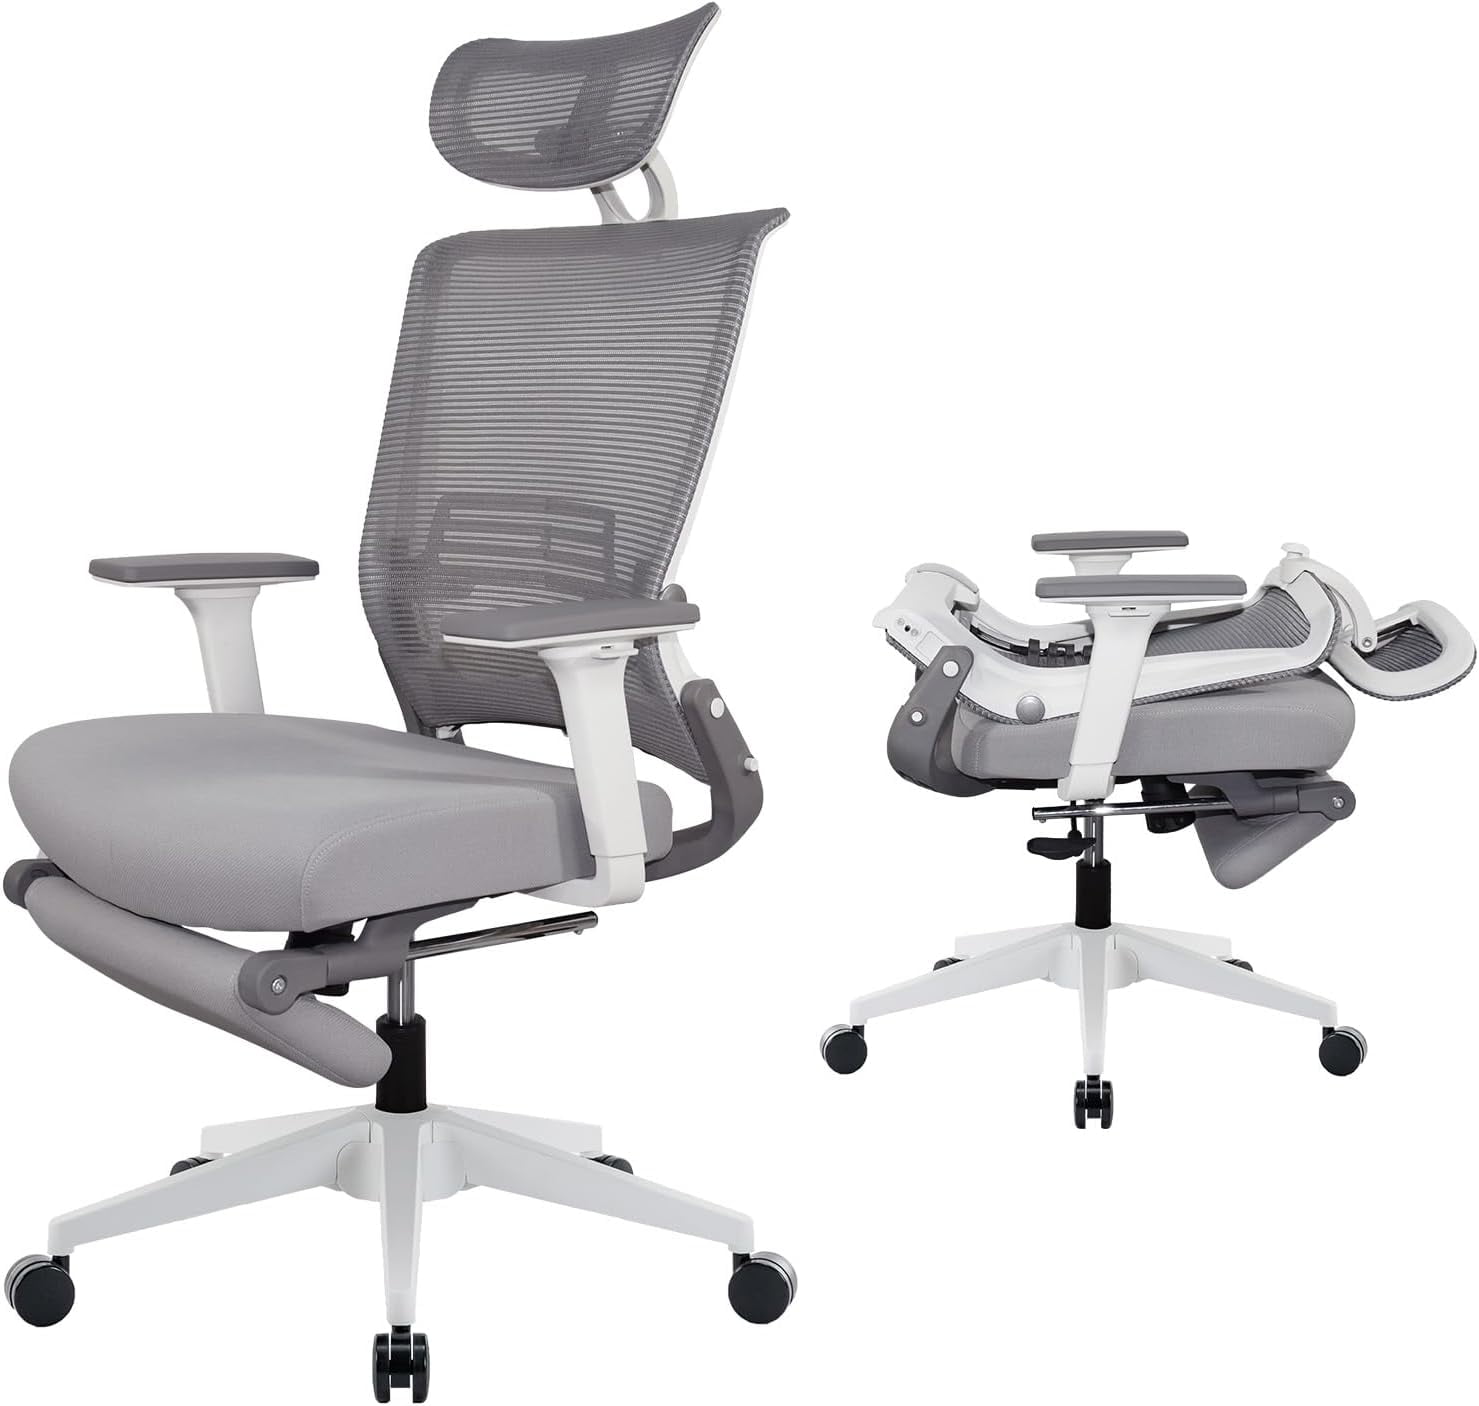 Hforesty Foldable Office Chair with Footrest,Gray Ergonomic Mesh Office  Desk Chair,Comfortable Tilt Function Swivel Computer Office Chair, Lumbar